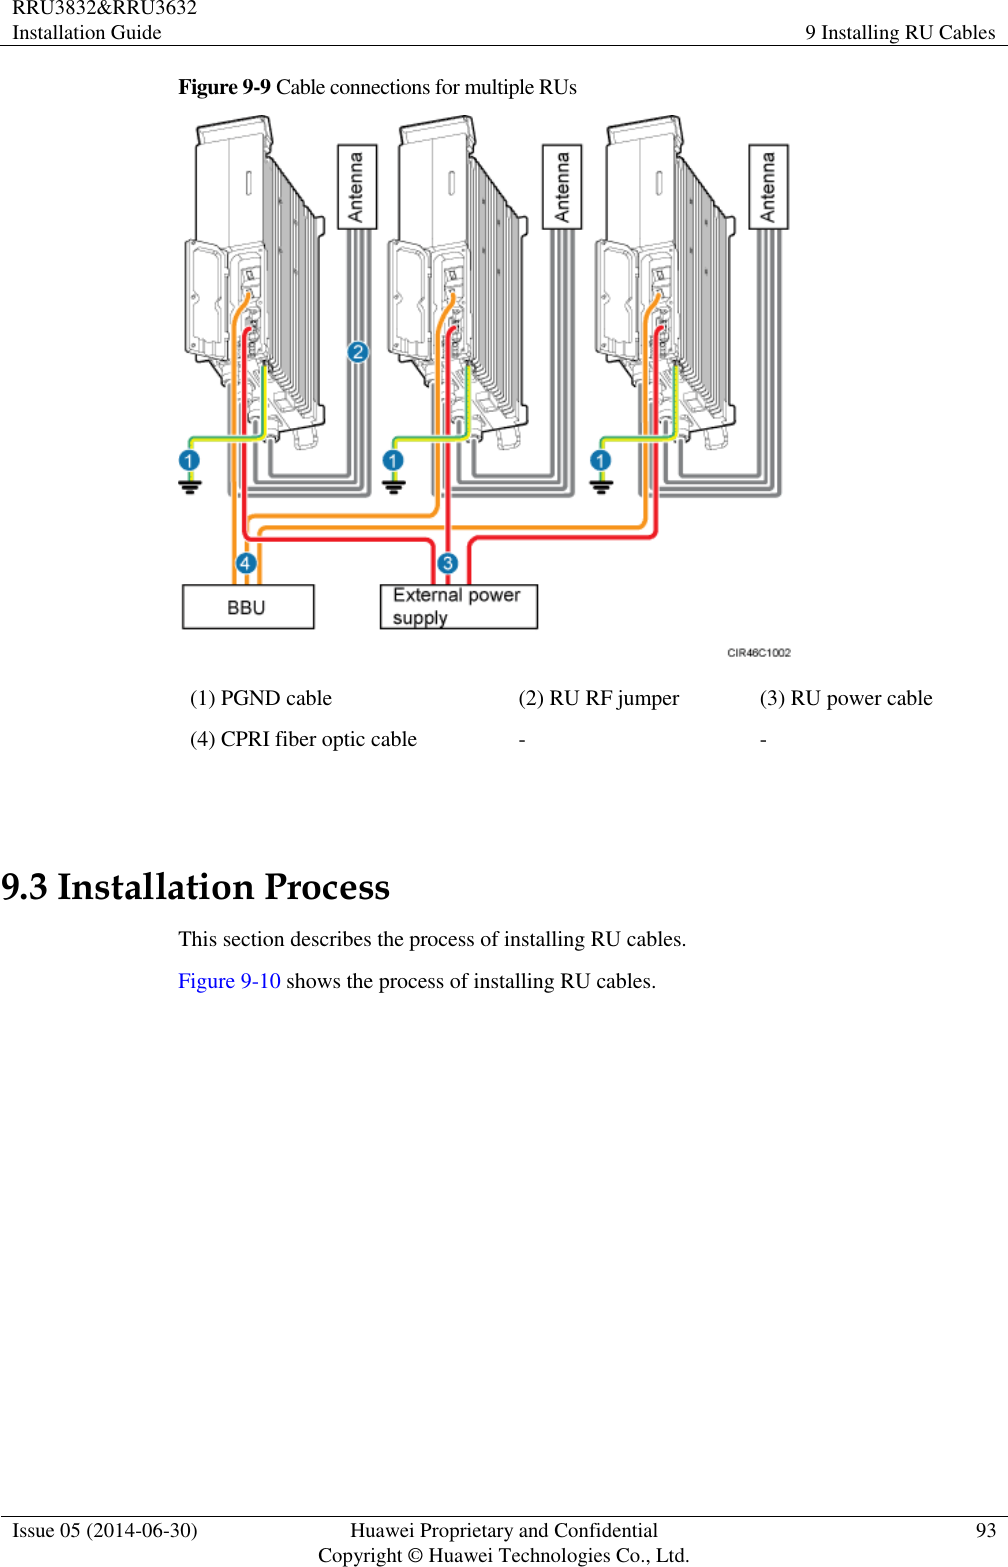 RRU3832&amp;RRU3632 Installation Guide 9 Installing RU Cables  Issue 05 (2014-06-30) Huawei Proprietary and Confidential                                     Copyright © Huawei Technologies Co., Ltd. 93  Figure 9-9 Cable connections for multiple RUs  (1) PGND cable (2) RU RF jumper (3) RU power cable (4) CPRI fiber optic cable - -  9.3 Installation Process This section describes the process of installing RU cables. Figure 9-10 shows the process of installing RU cables. 